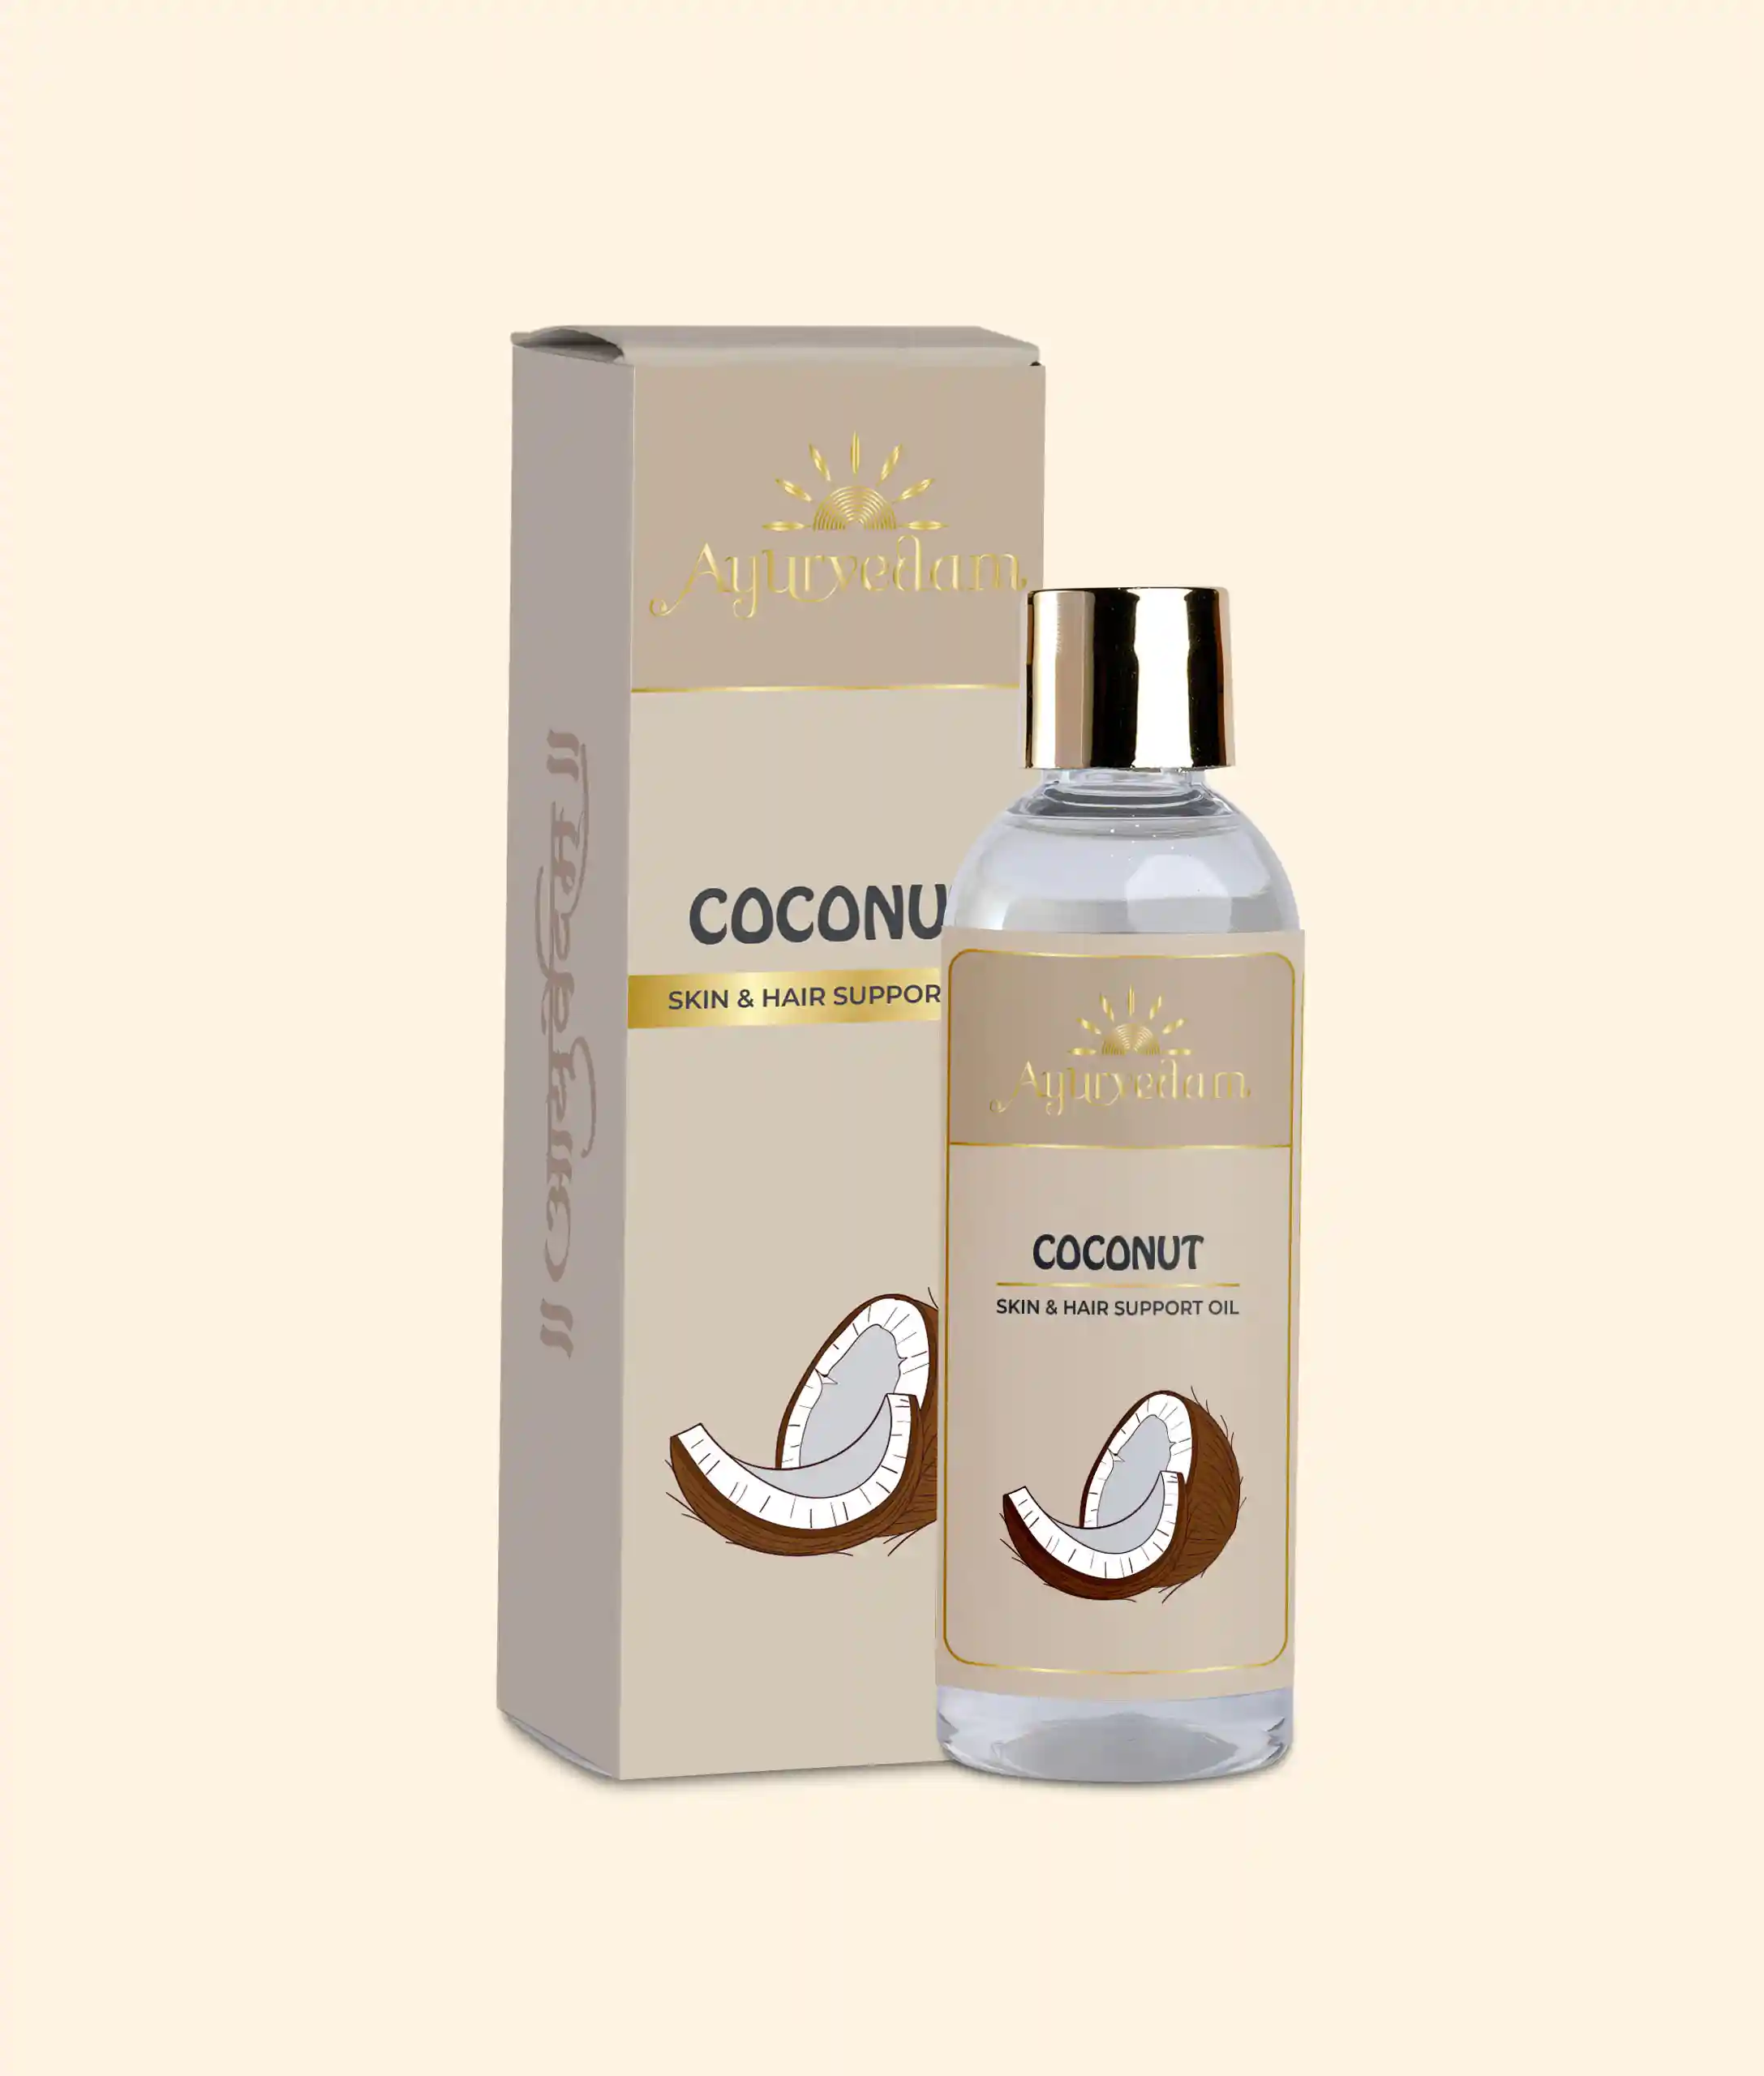 A bottle of Cold Pressed Coconut Oil by Ayurvedam 100ml